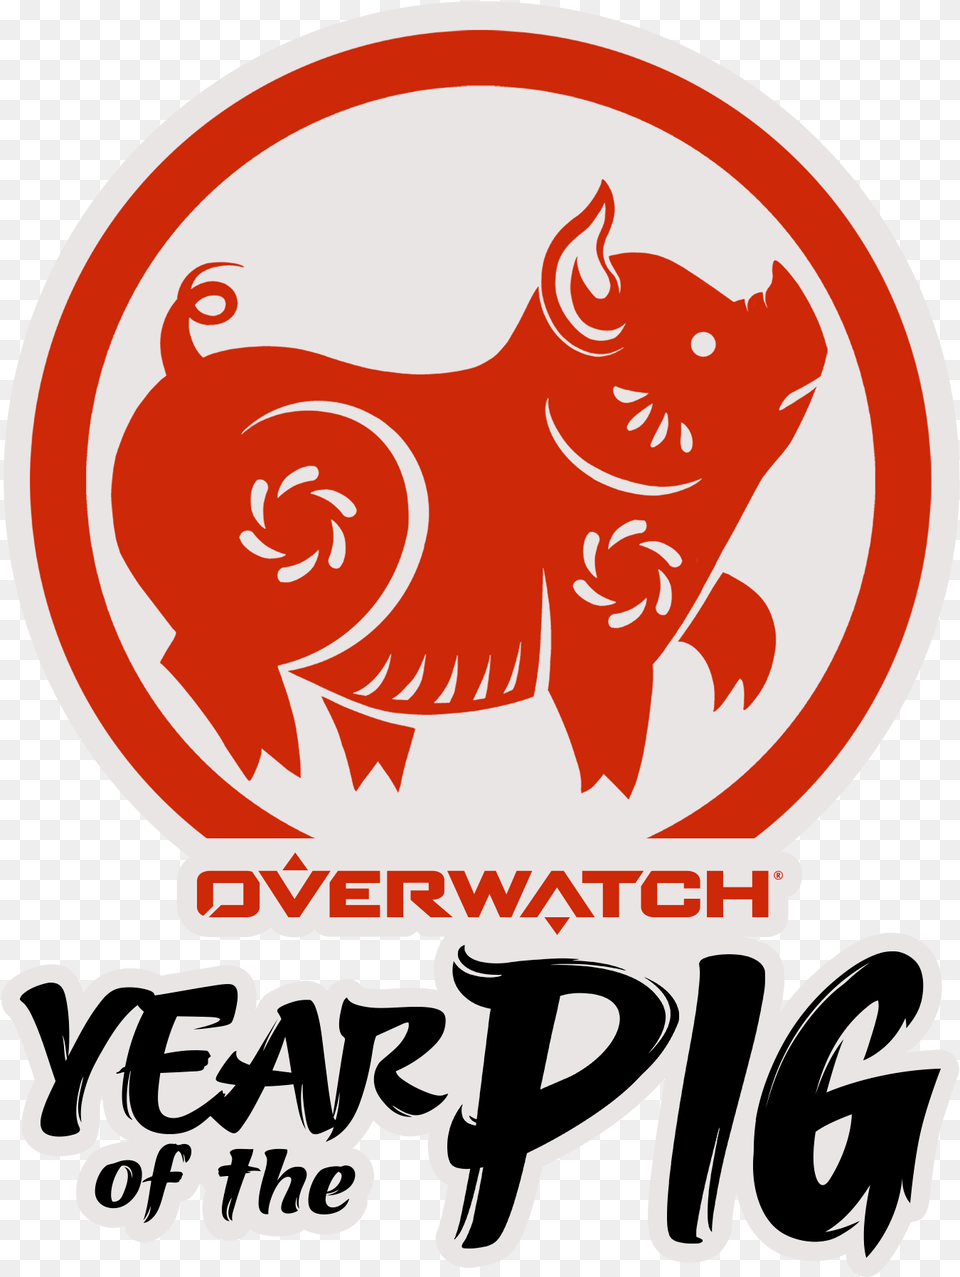 Lunar New Year 2019 Of The Pig Event Announced Overwatch Lunar New Year 2019, Logo, Sticker Png